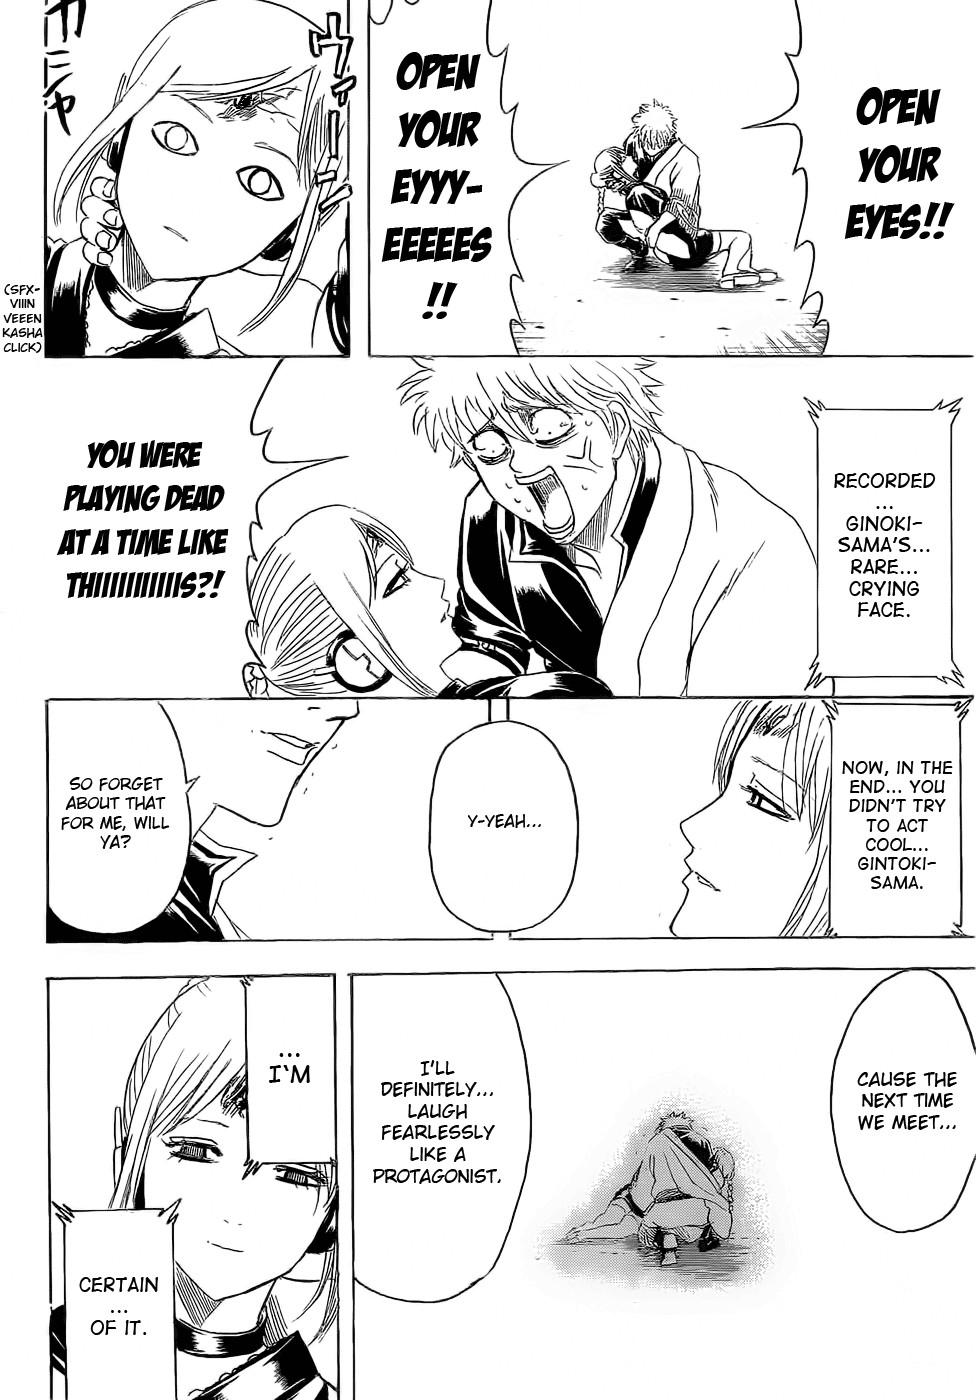 Gintama chapter 375 page 17